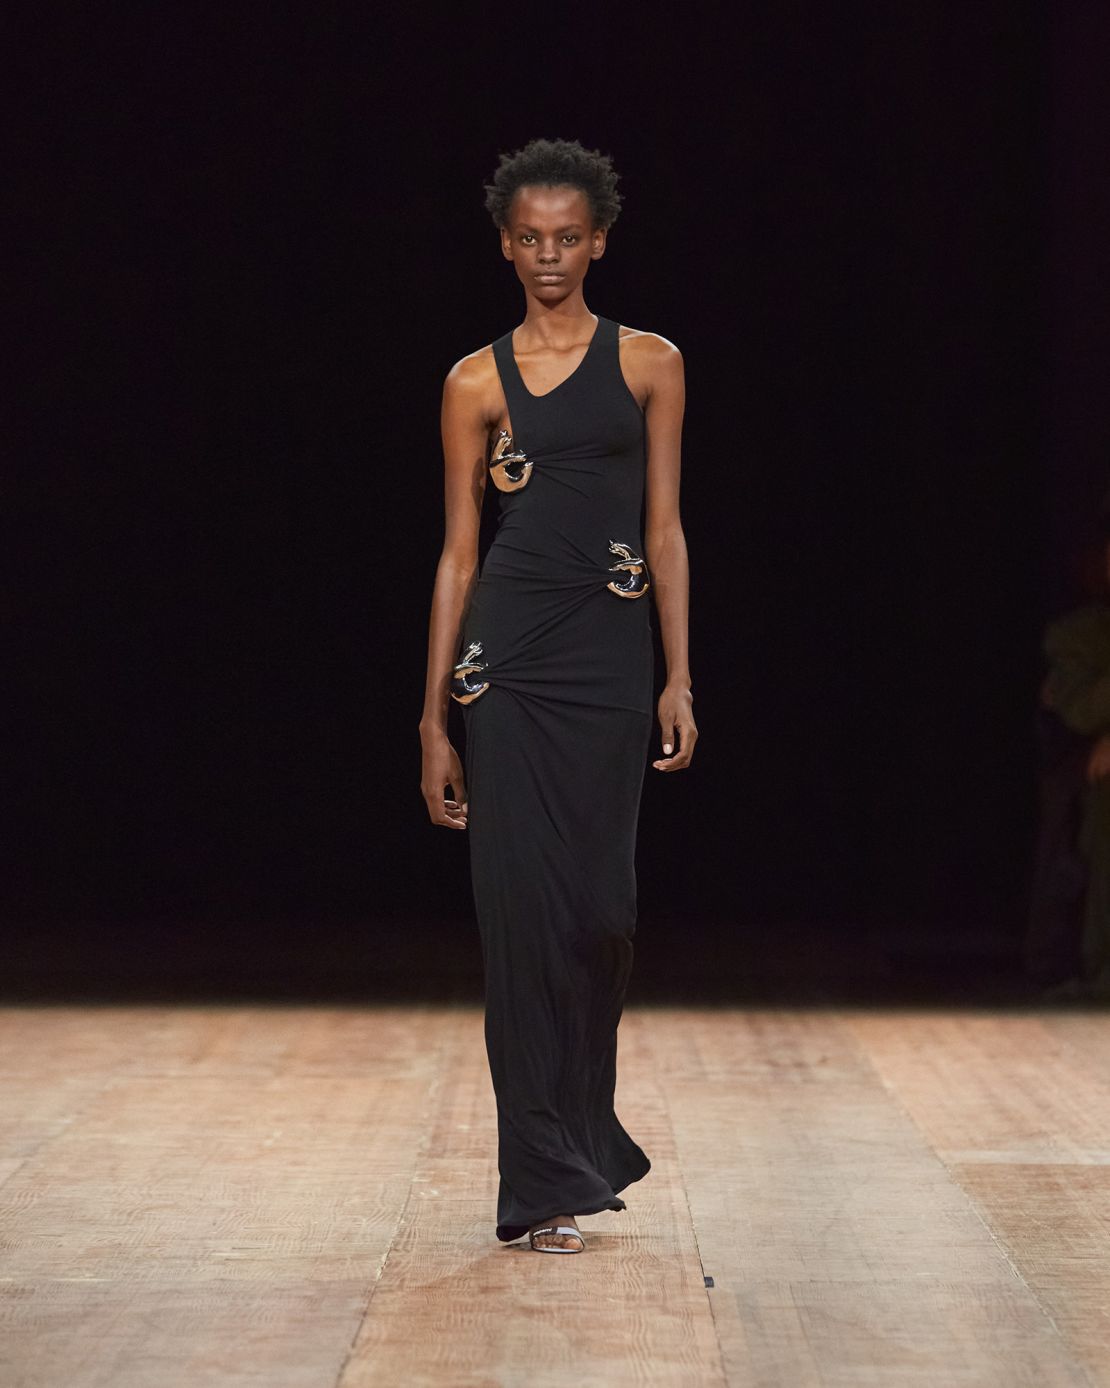 One dress at Coperni featured metal, pincer-shaped accents.